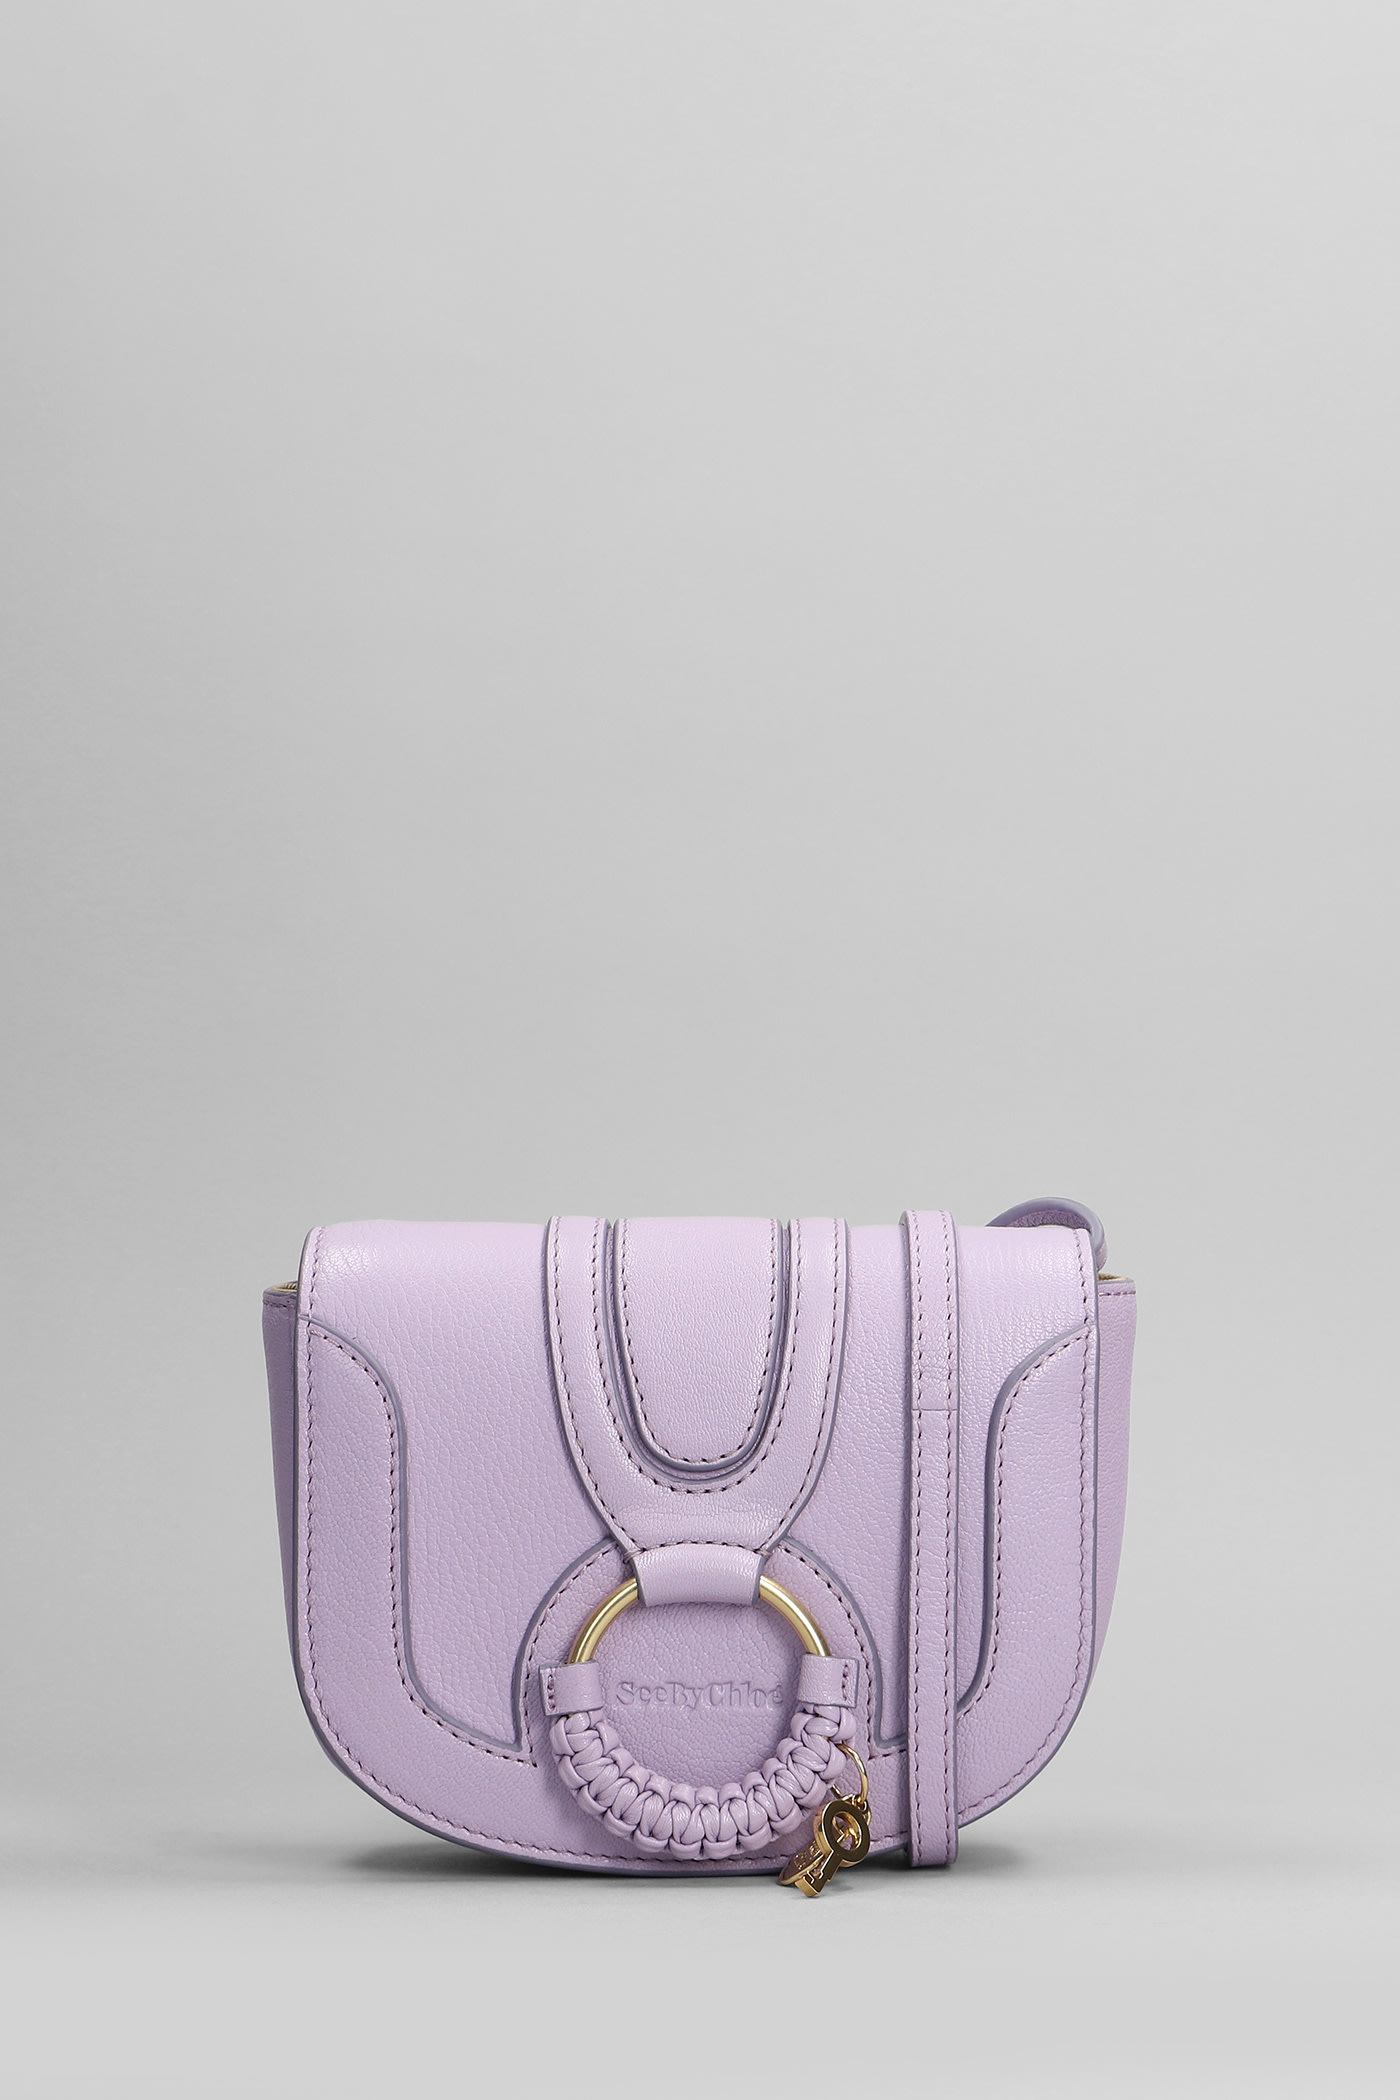 See by Chloé Hana Mini Shoulder Bag In Lilla Leather